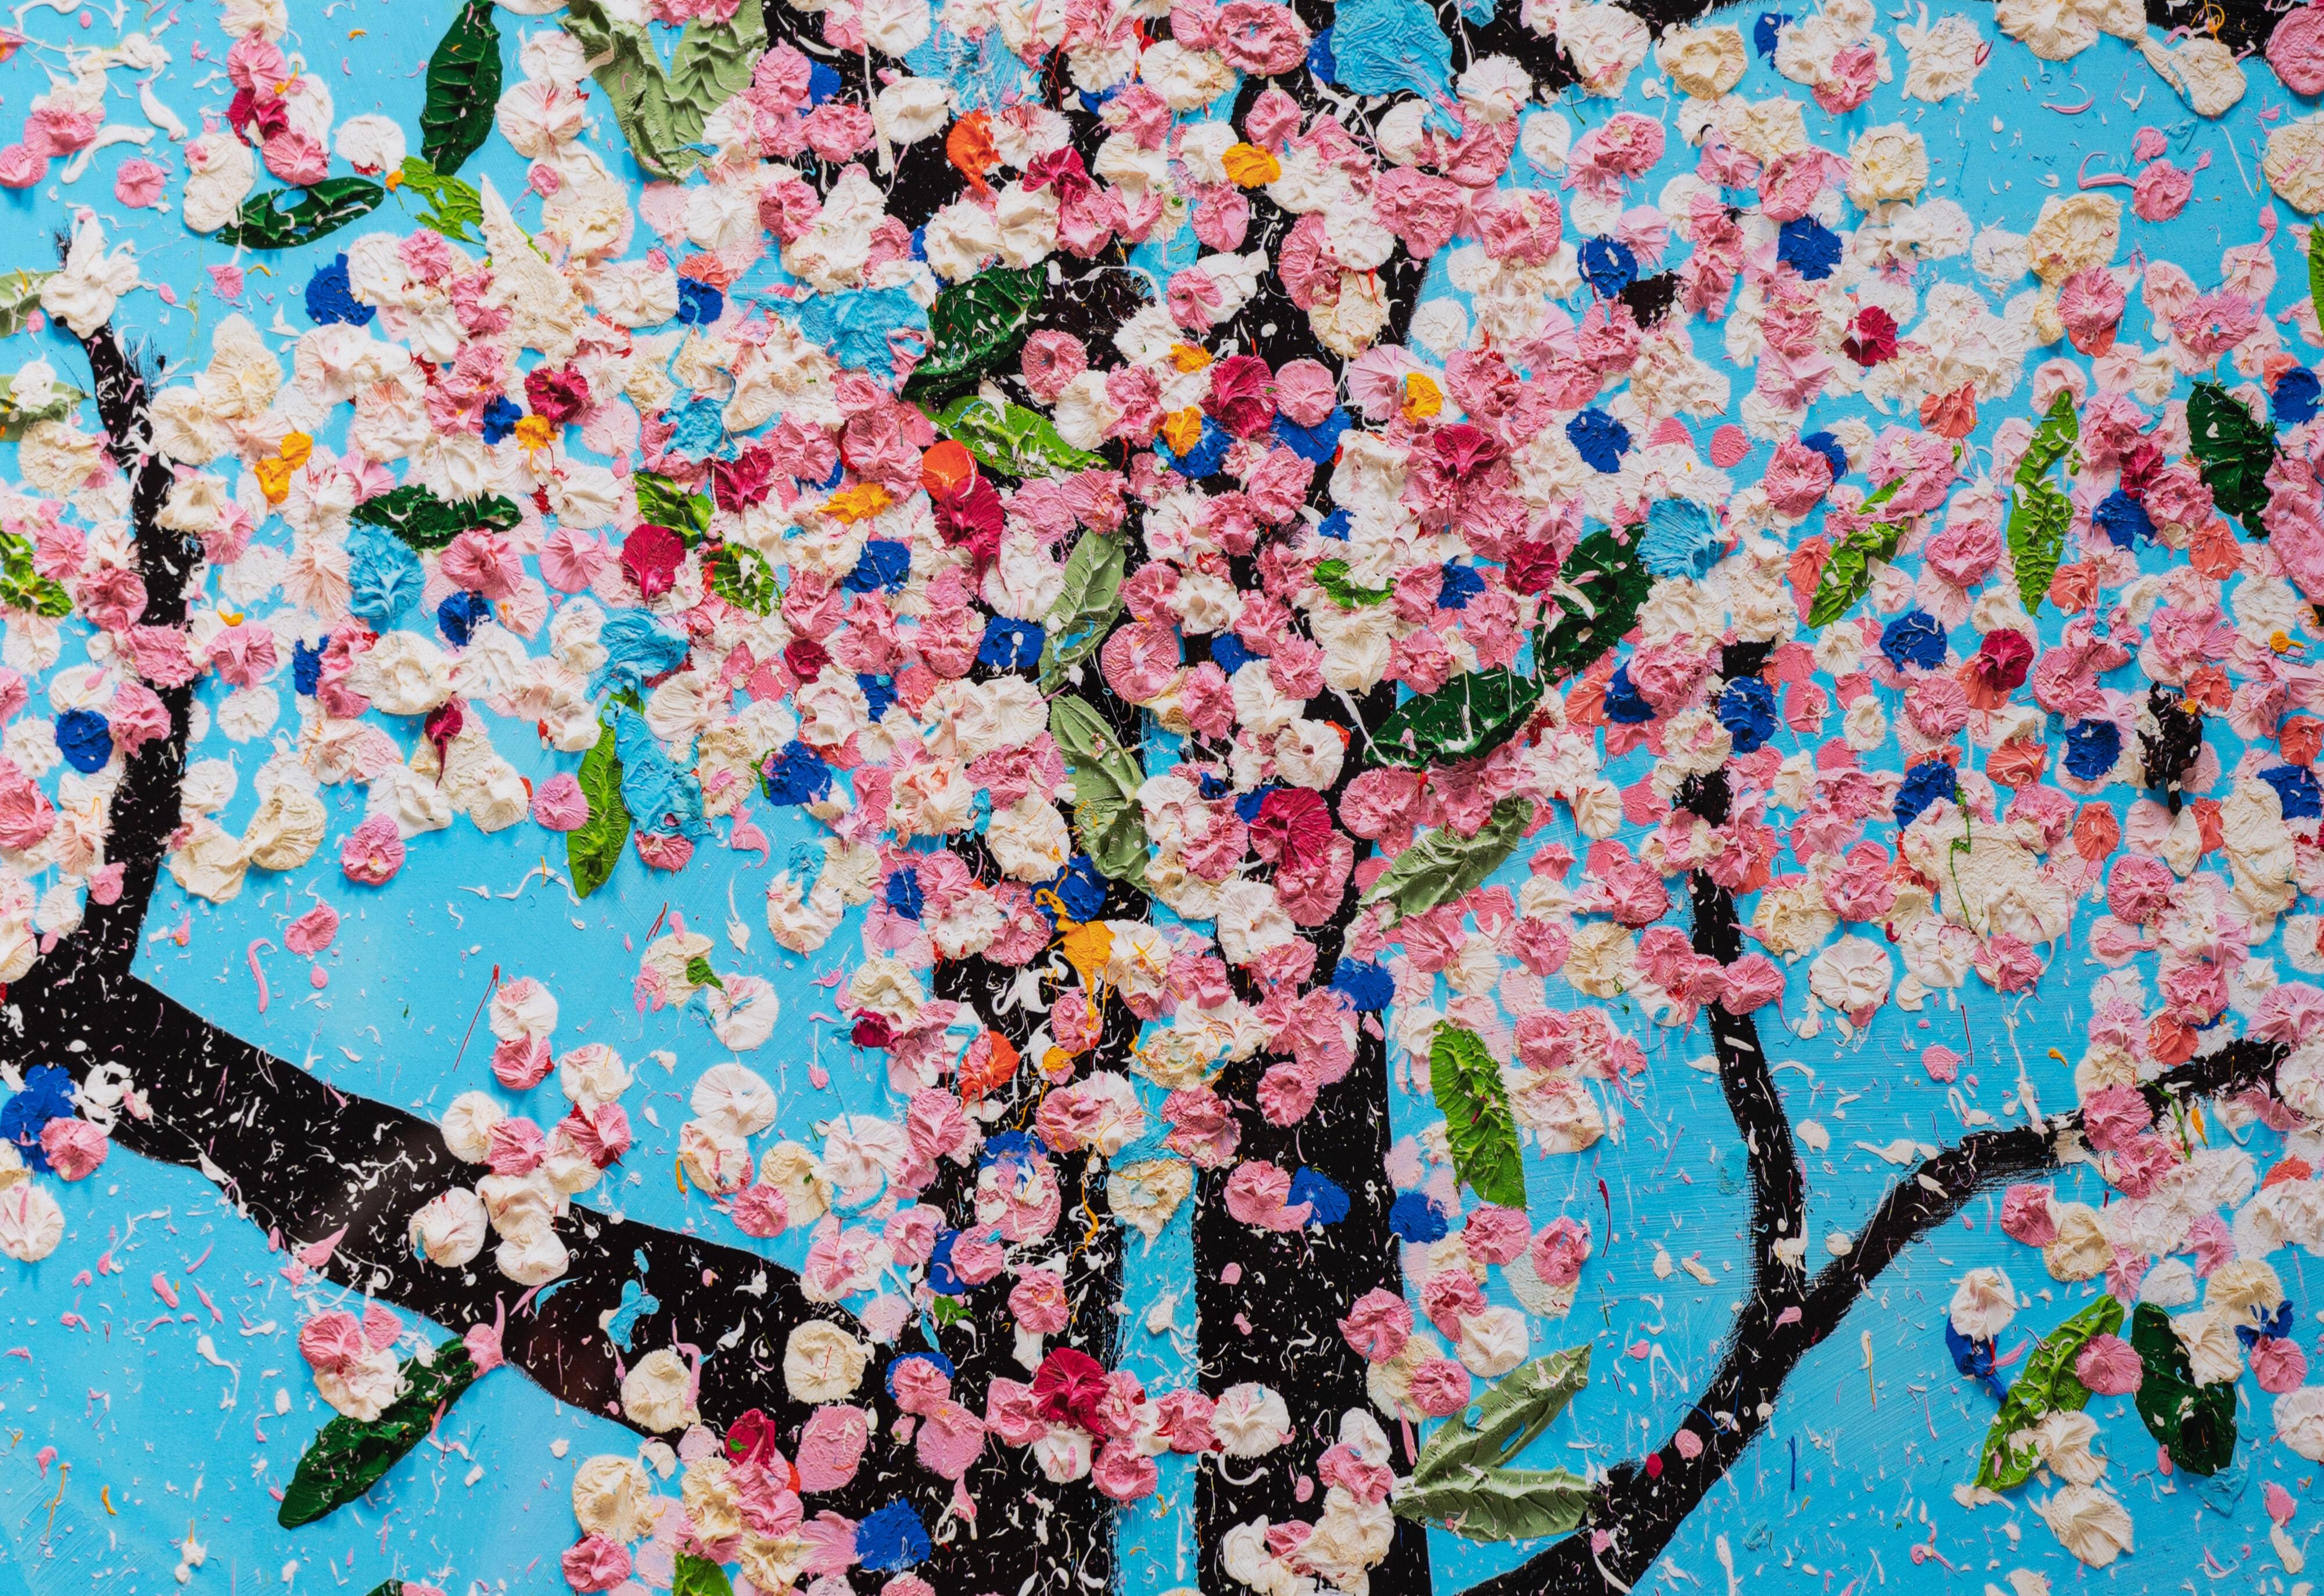 The Virtues 'Politeness', Limited Edition 'Cherry Blossom' Landscape, 2021 - Contemporary Print by Damien Hirst